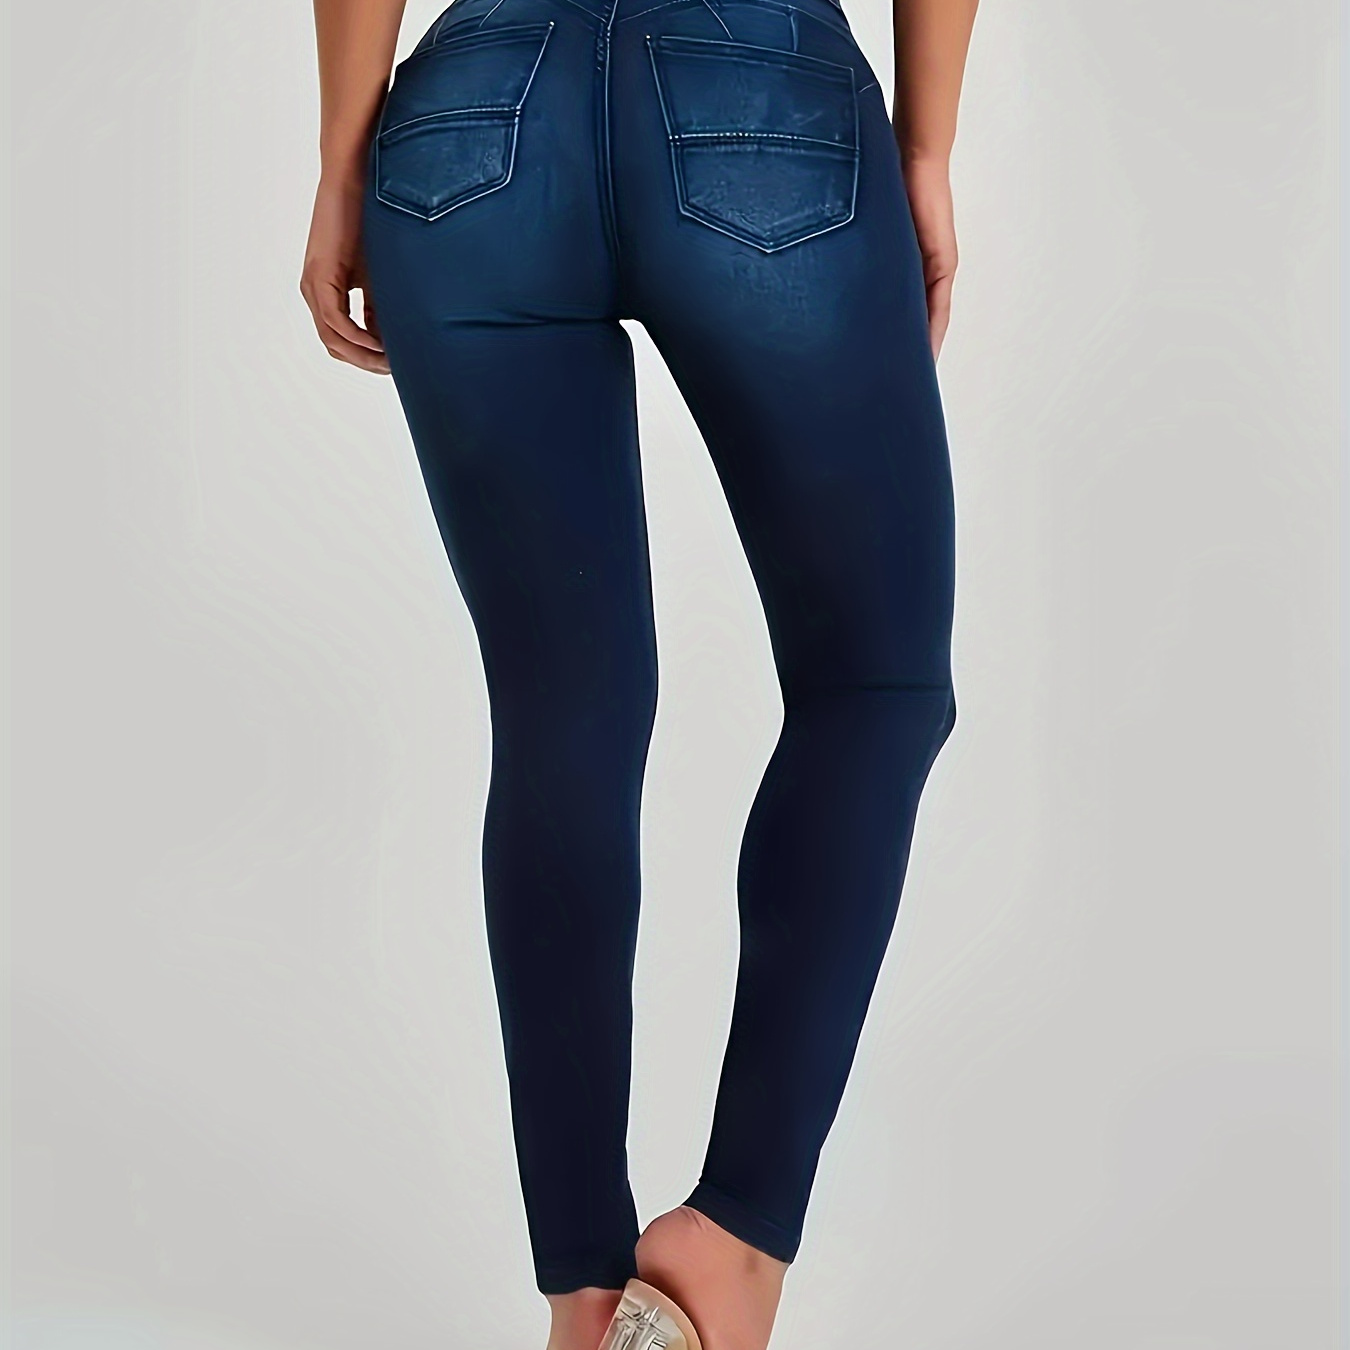 

Women's Elegant High-waisted Denim Jeans, Fashion Skinny Fit Long Pants With Back Pockets, Stretchable Daily Casual Wear